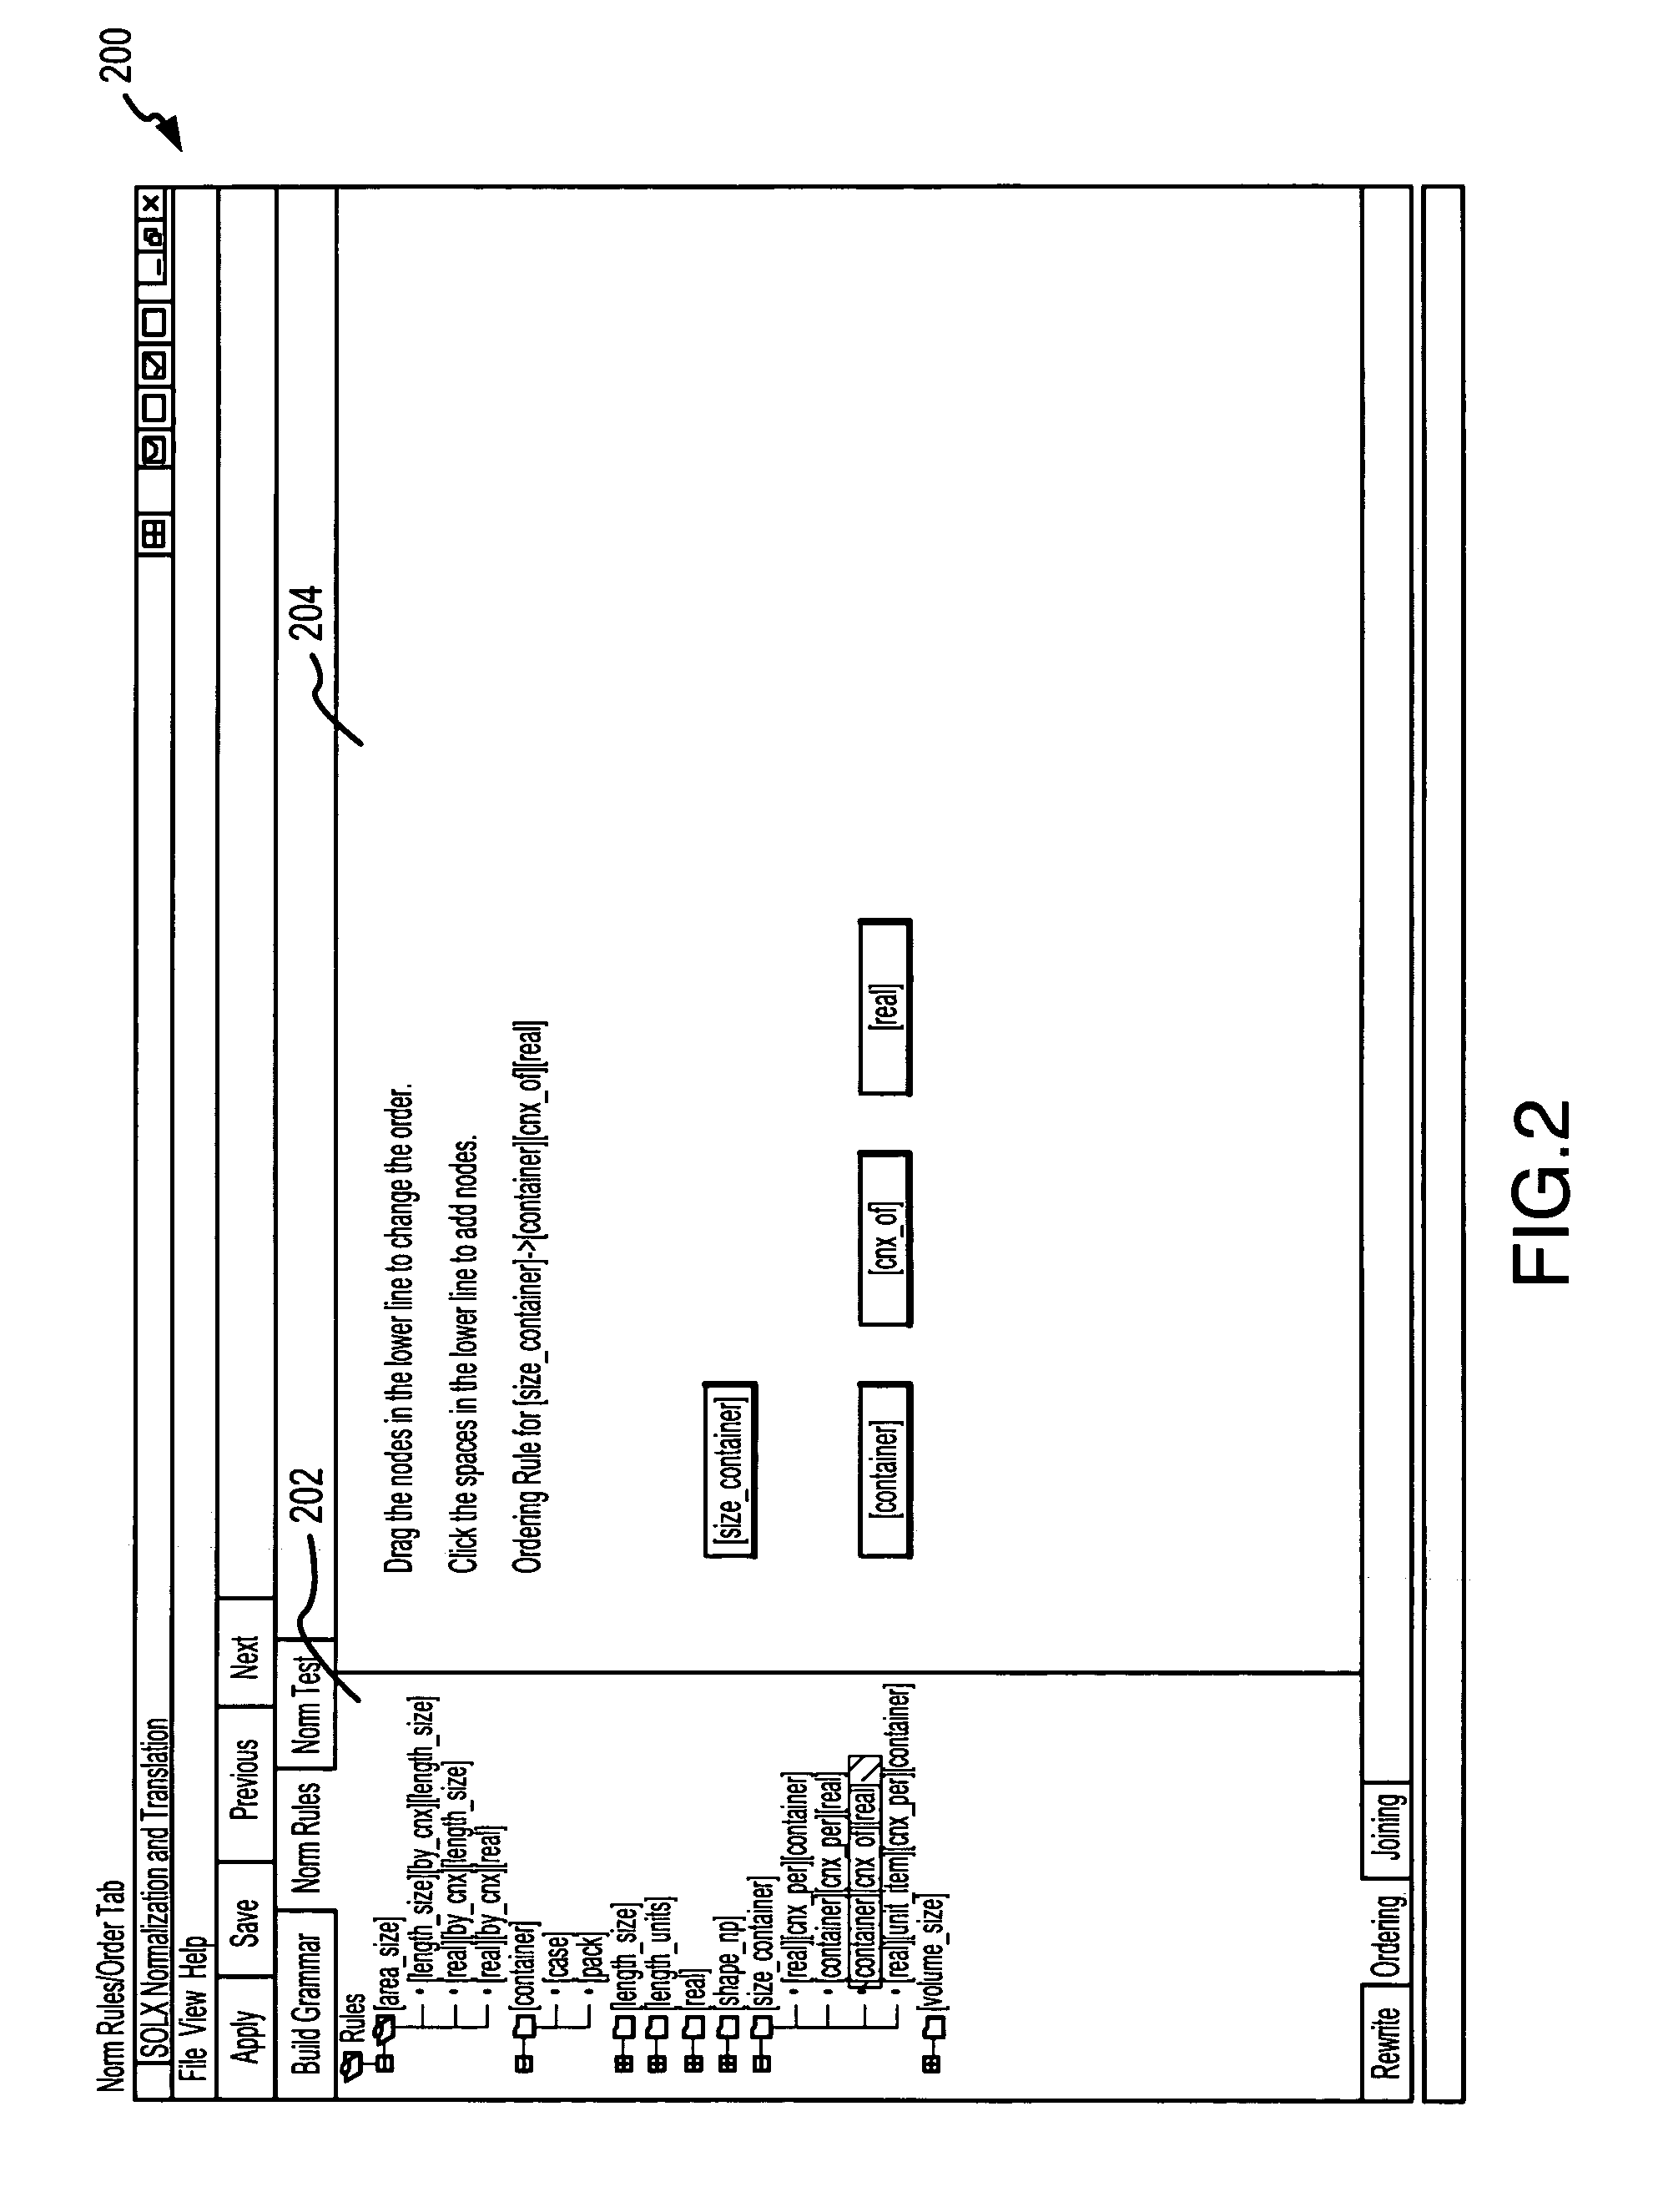 Method and apparatus for normalizing and converting structured content